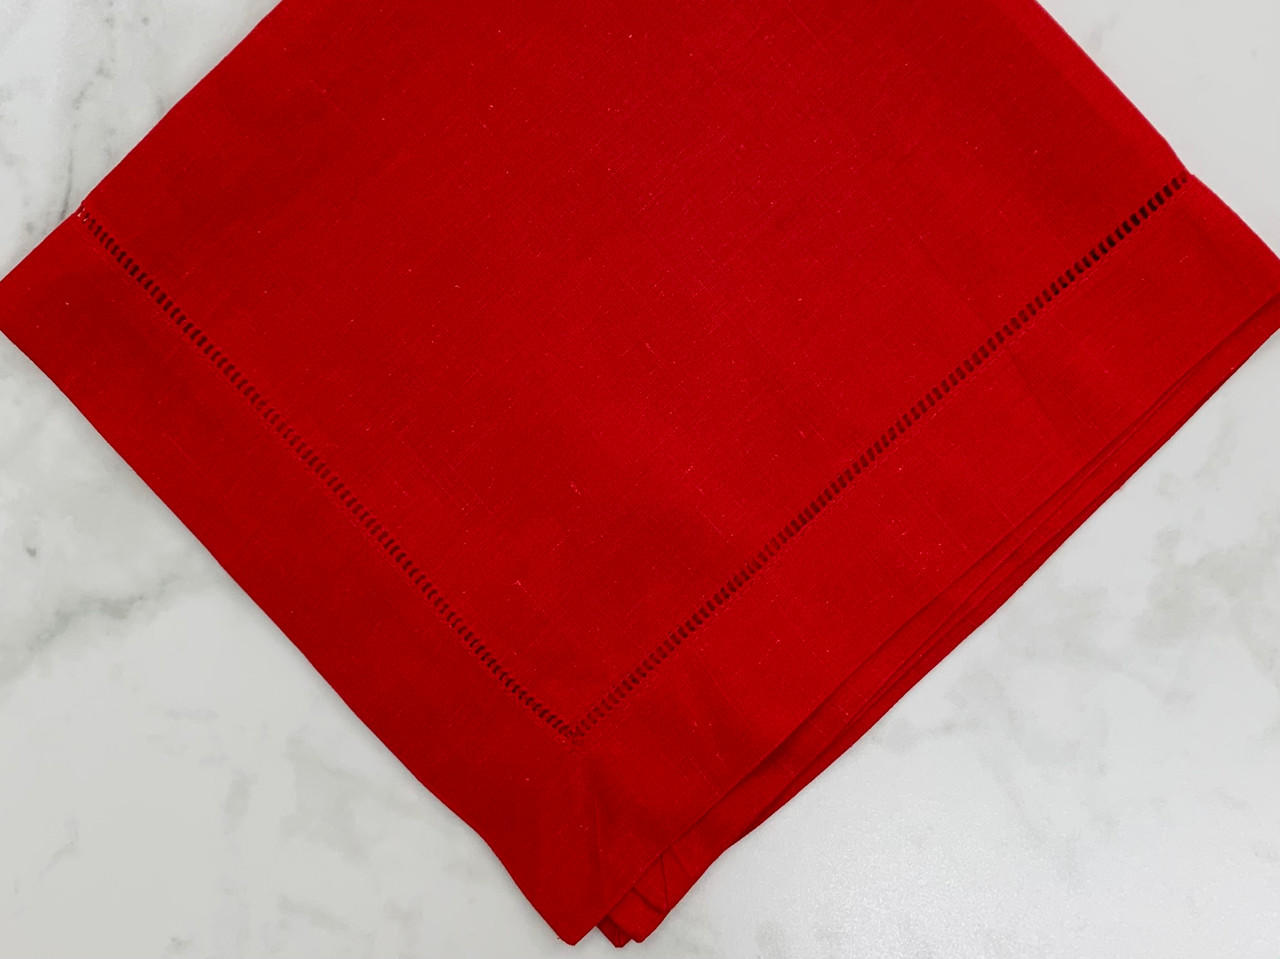  Welby-Wright Classic Hemstitch Dinner Napkin, Set of 12 | Red 